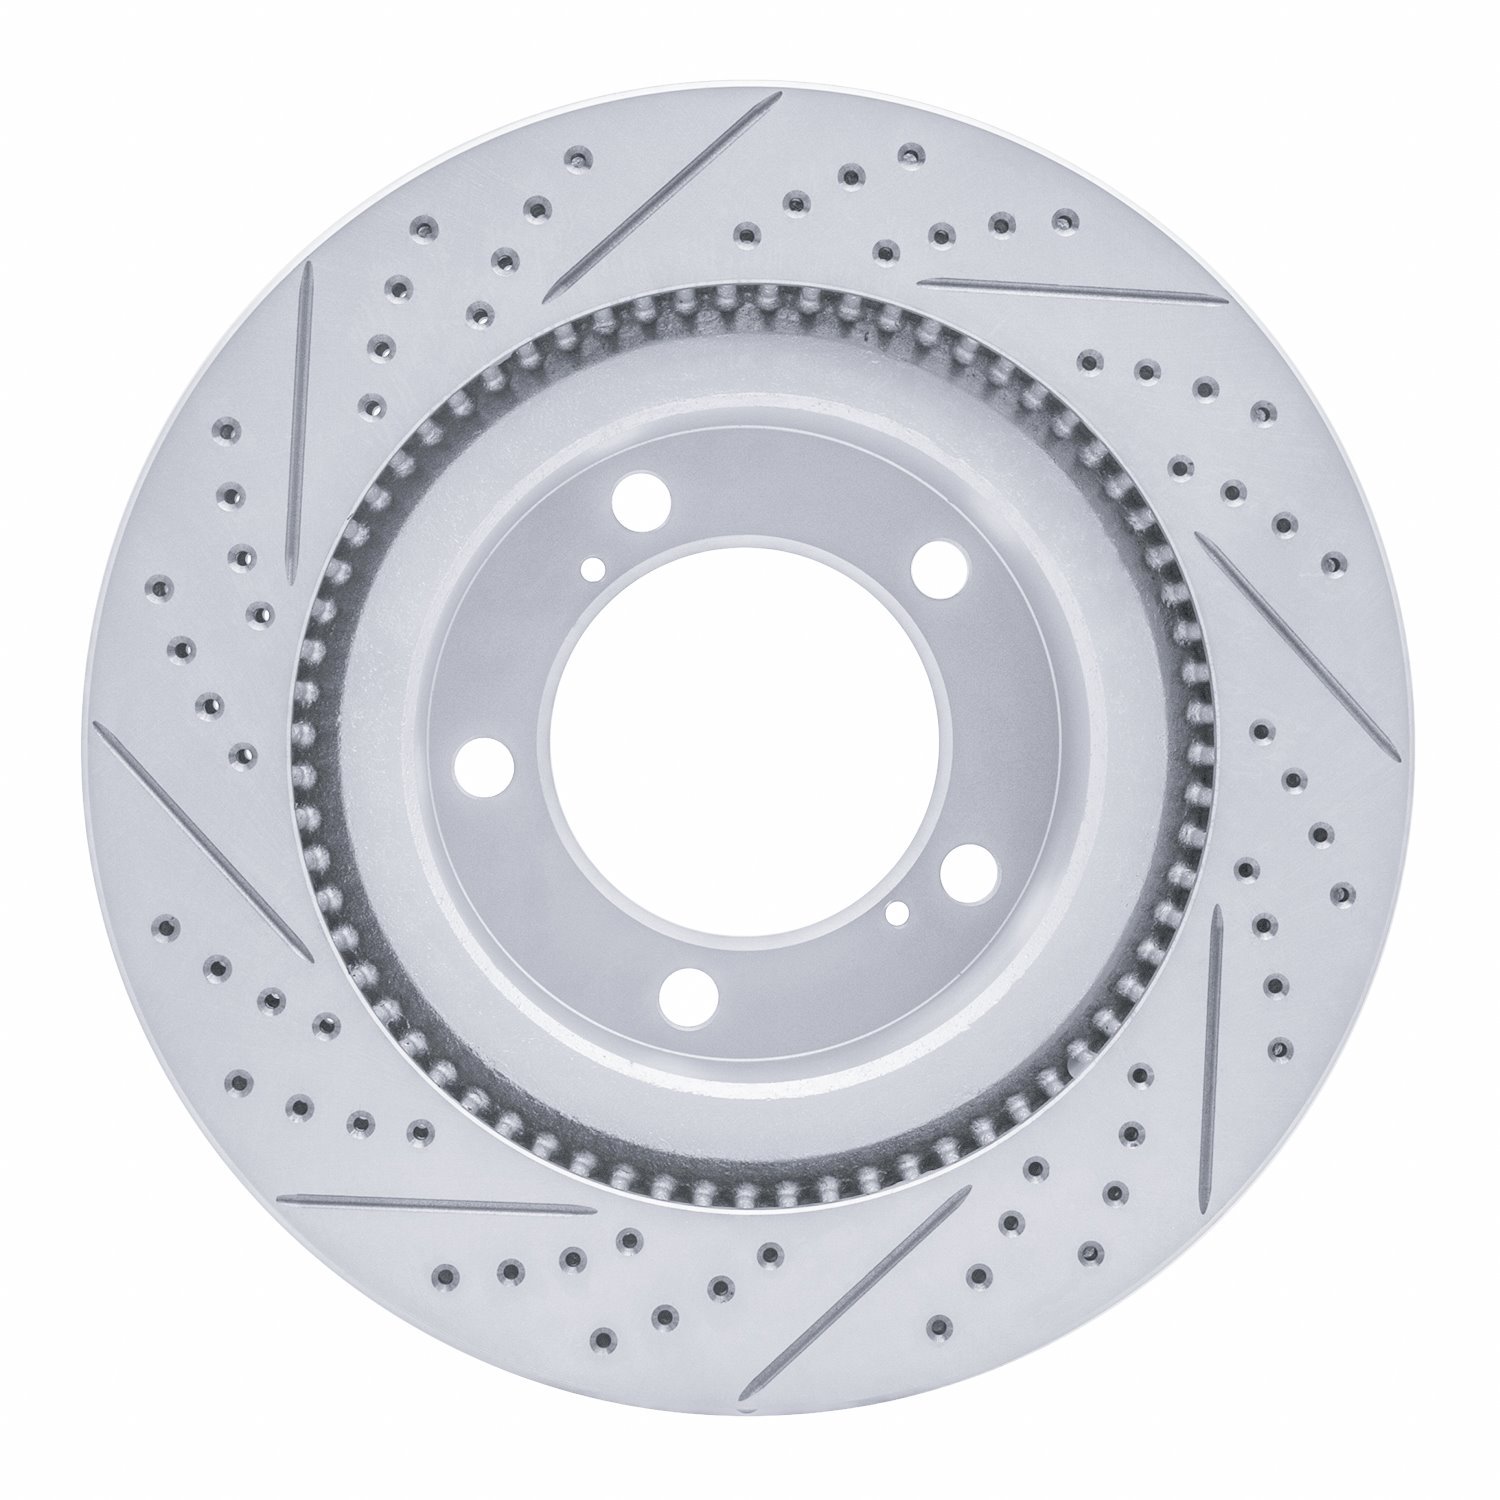 830-76136R Geoperformance Drilled/Slotted Brake Rotor, Fits Select Lexus/Toyota/Scion, Position: Front Right